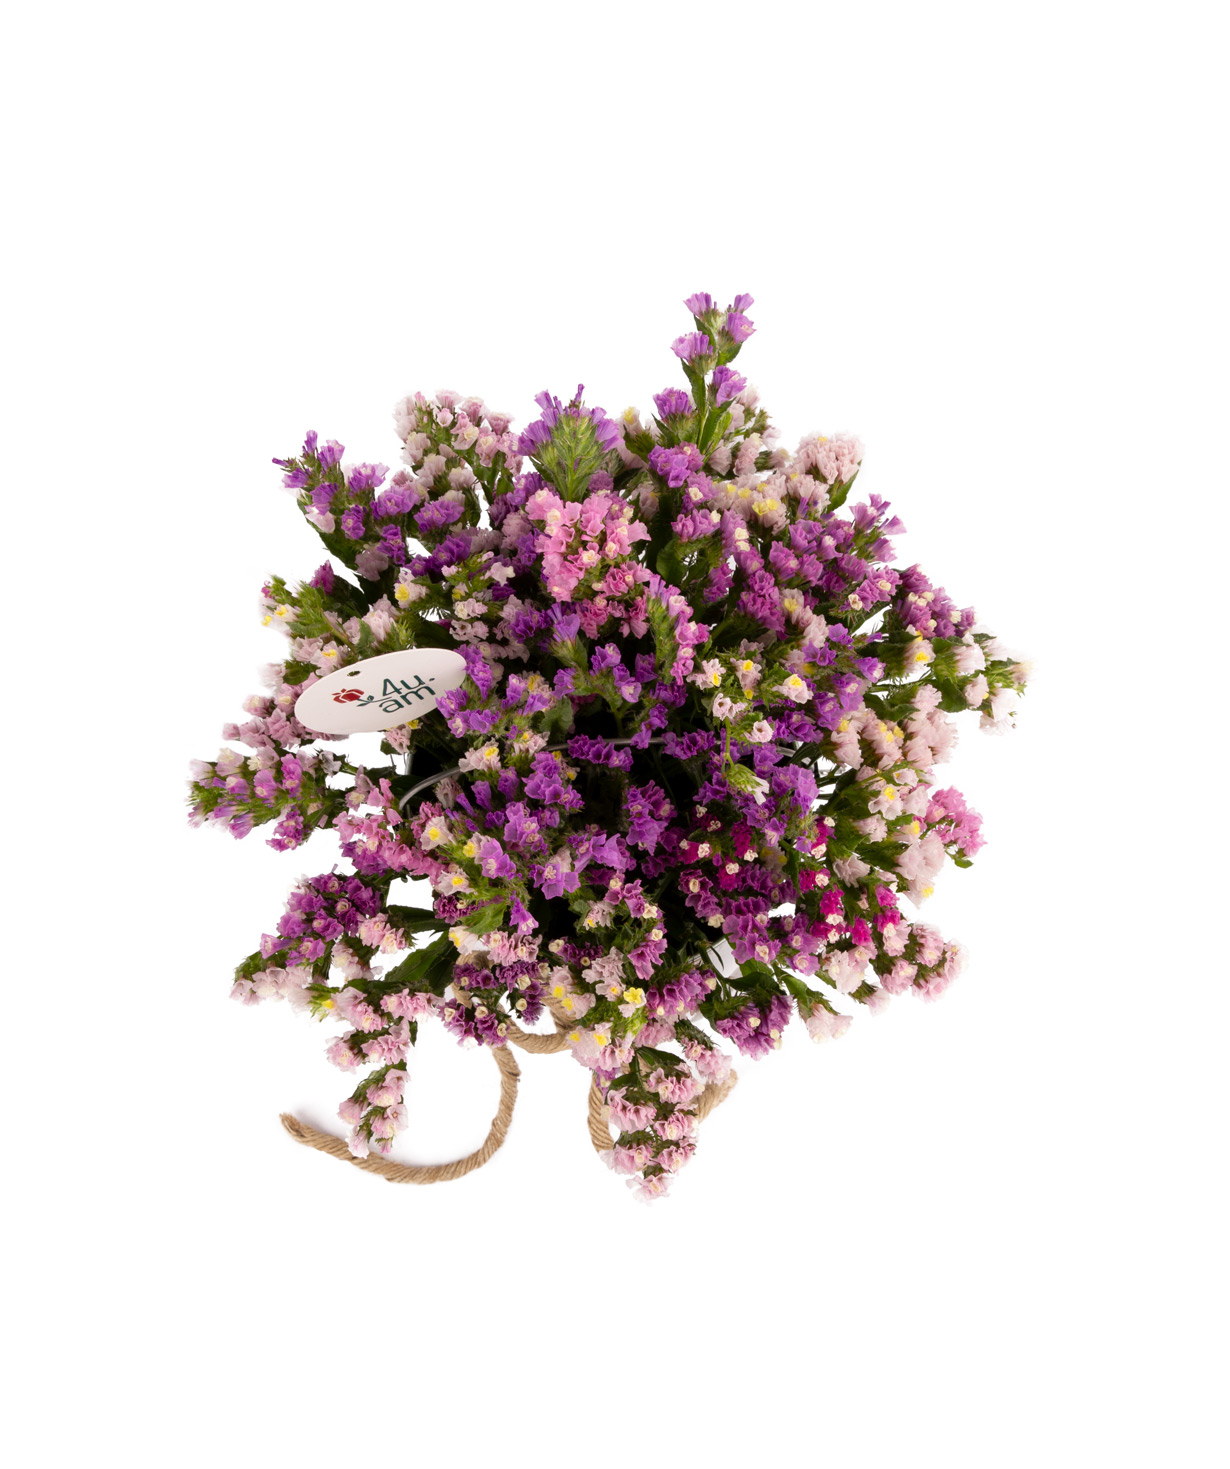 Composition `Zabel` with limoniums (dried flowers)